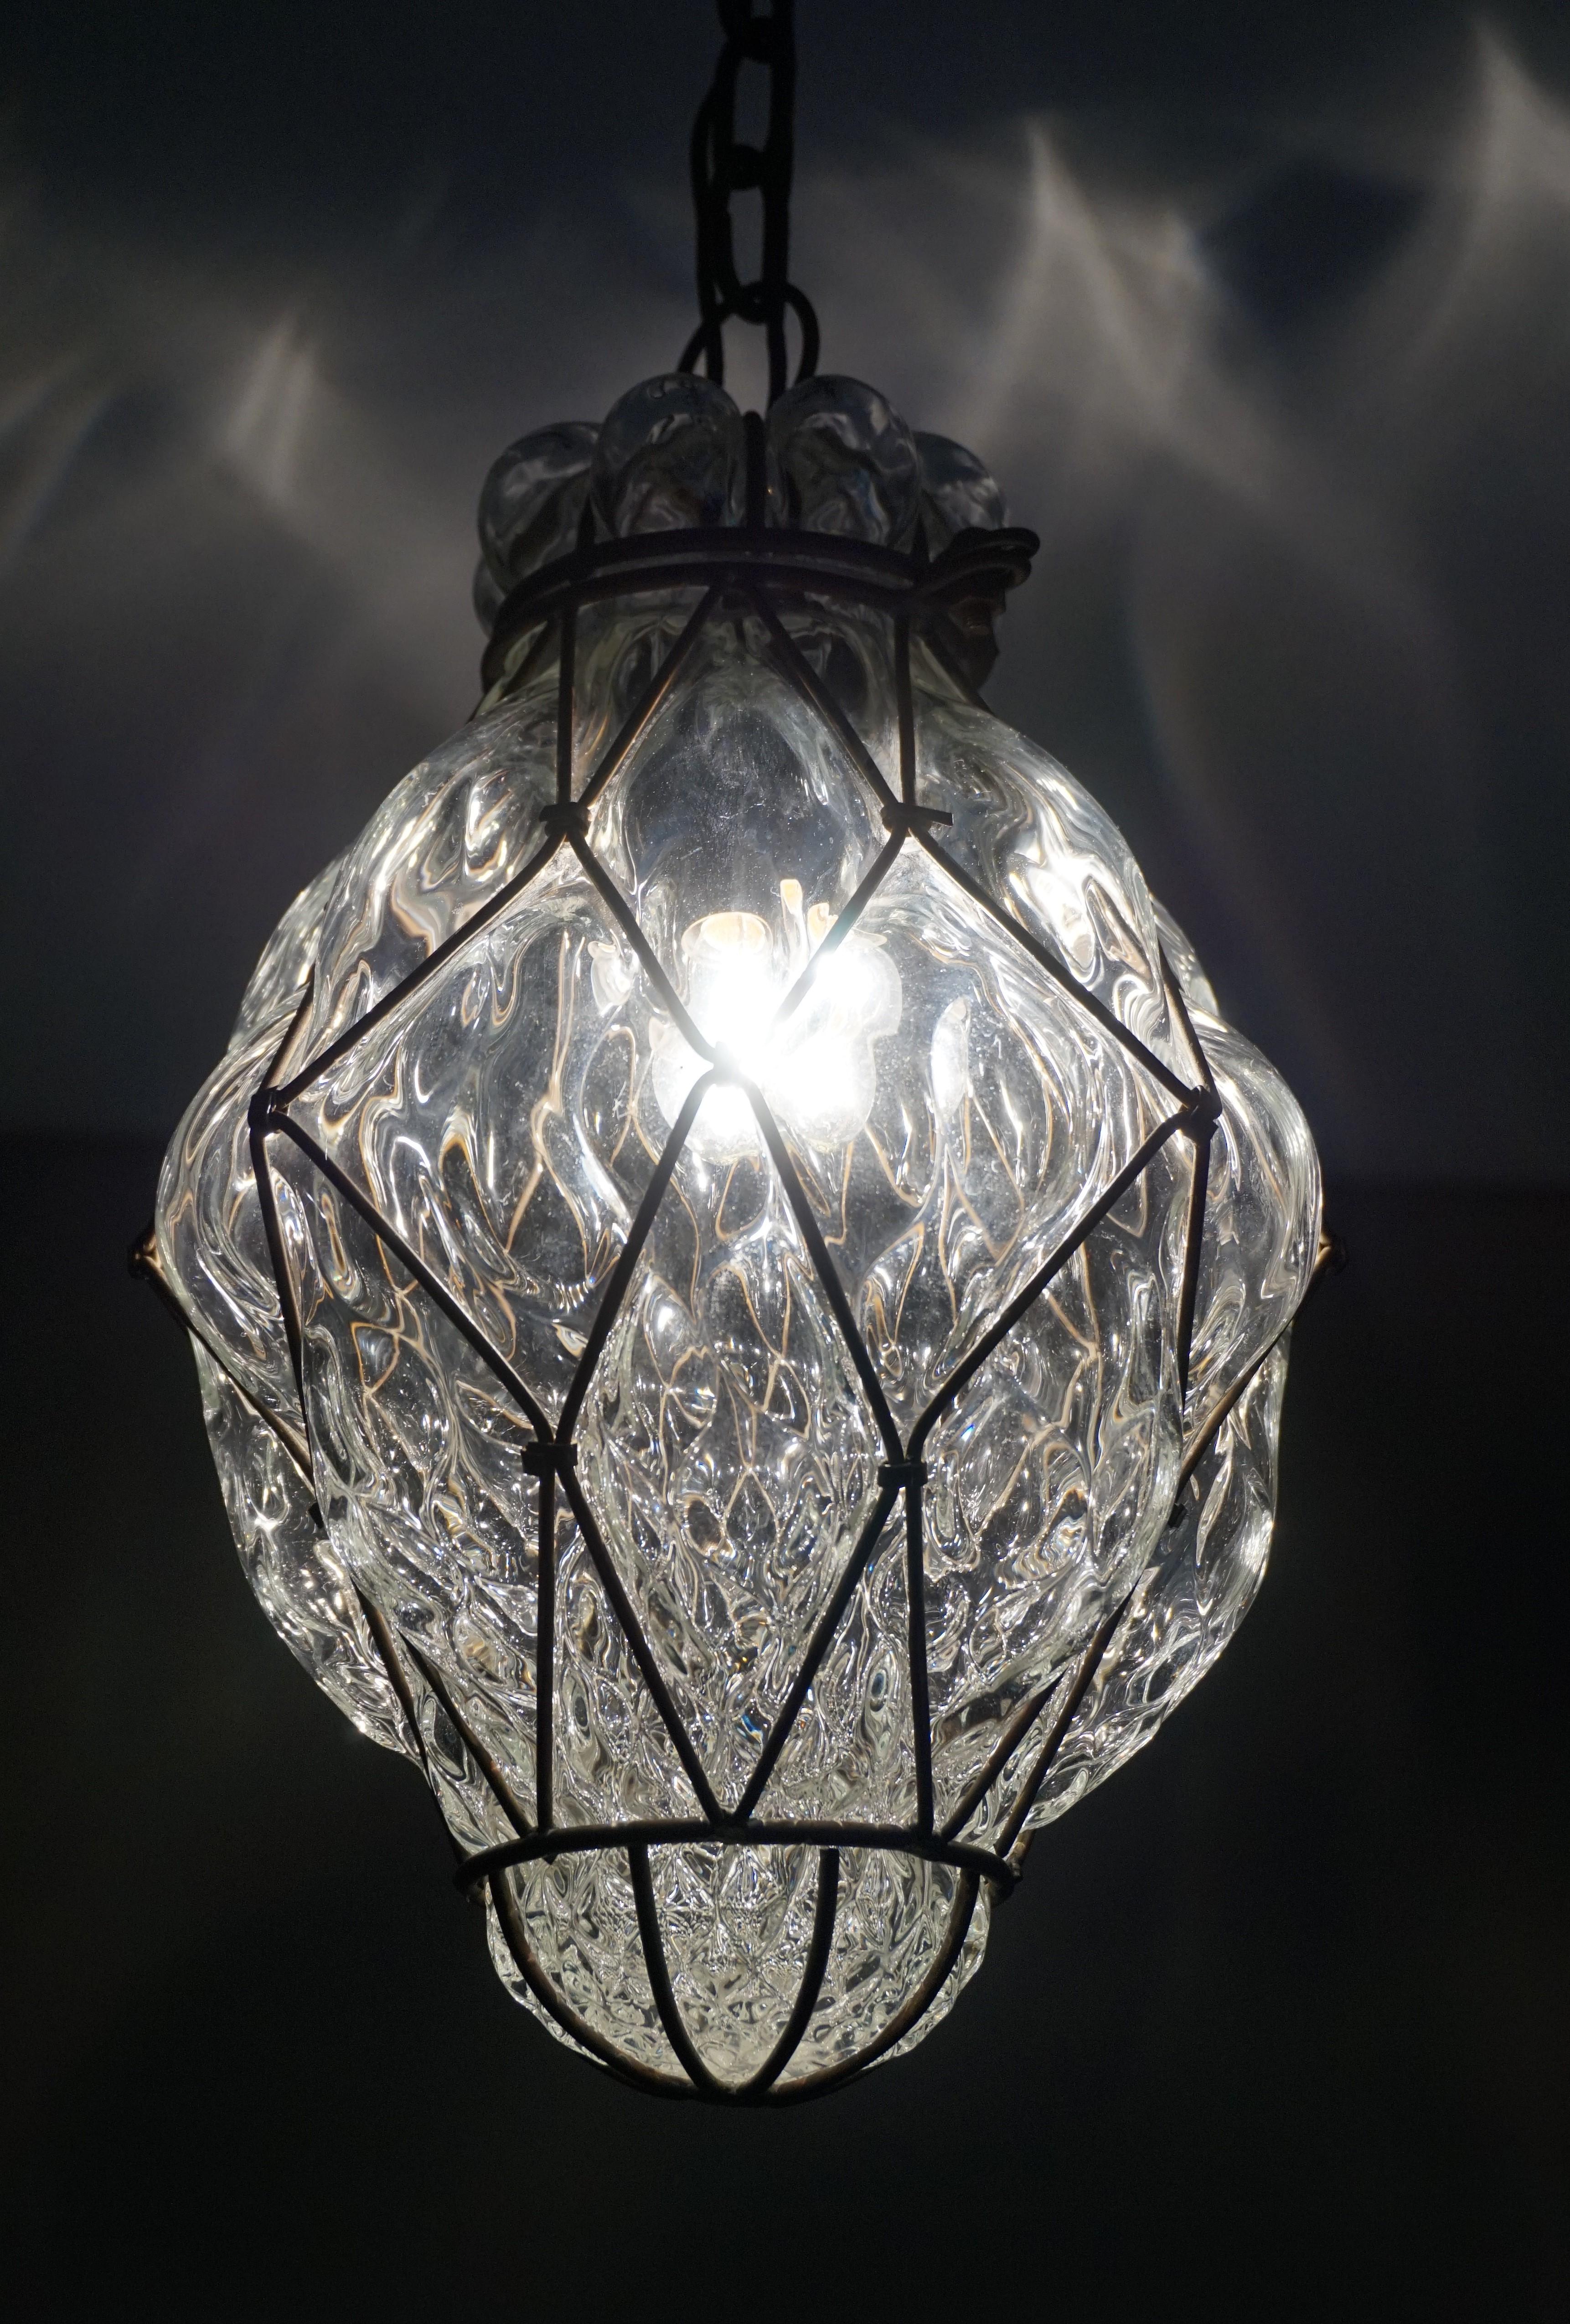 Stylish and excellent condition pendant from Venice.

This antique and rare light fixture from circa 1910-1920 is another one of our recent great finds. This Arts & Crafts design is unlike any handcrafted Venetian pendant that we have ever seen,